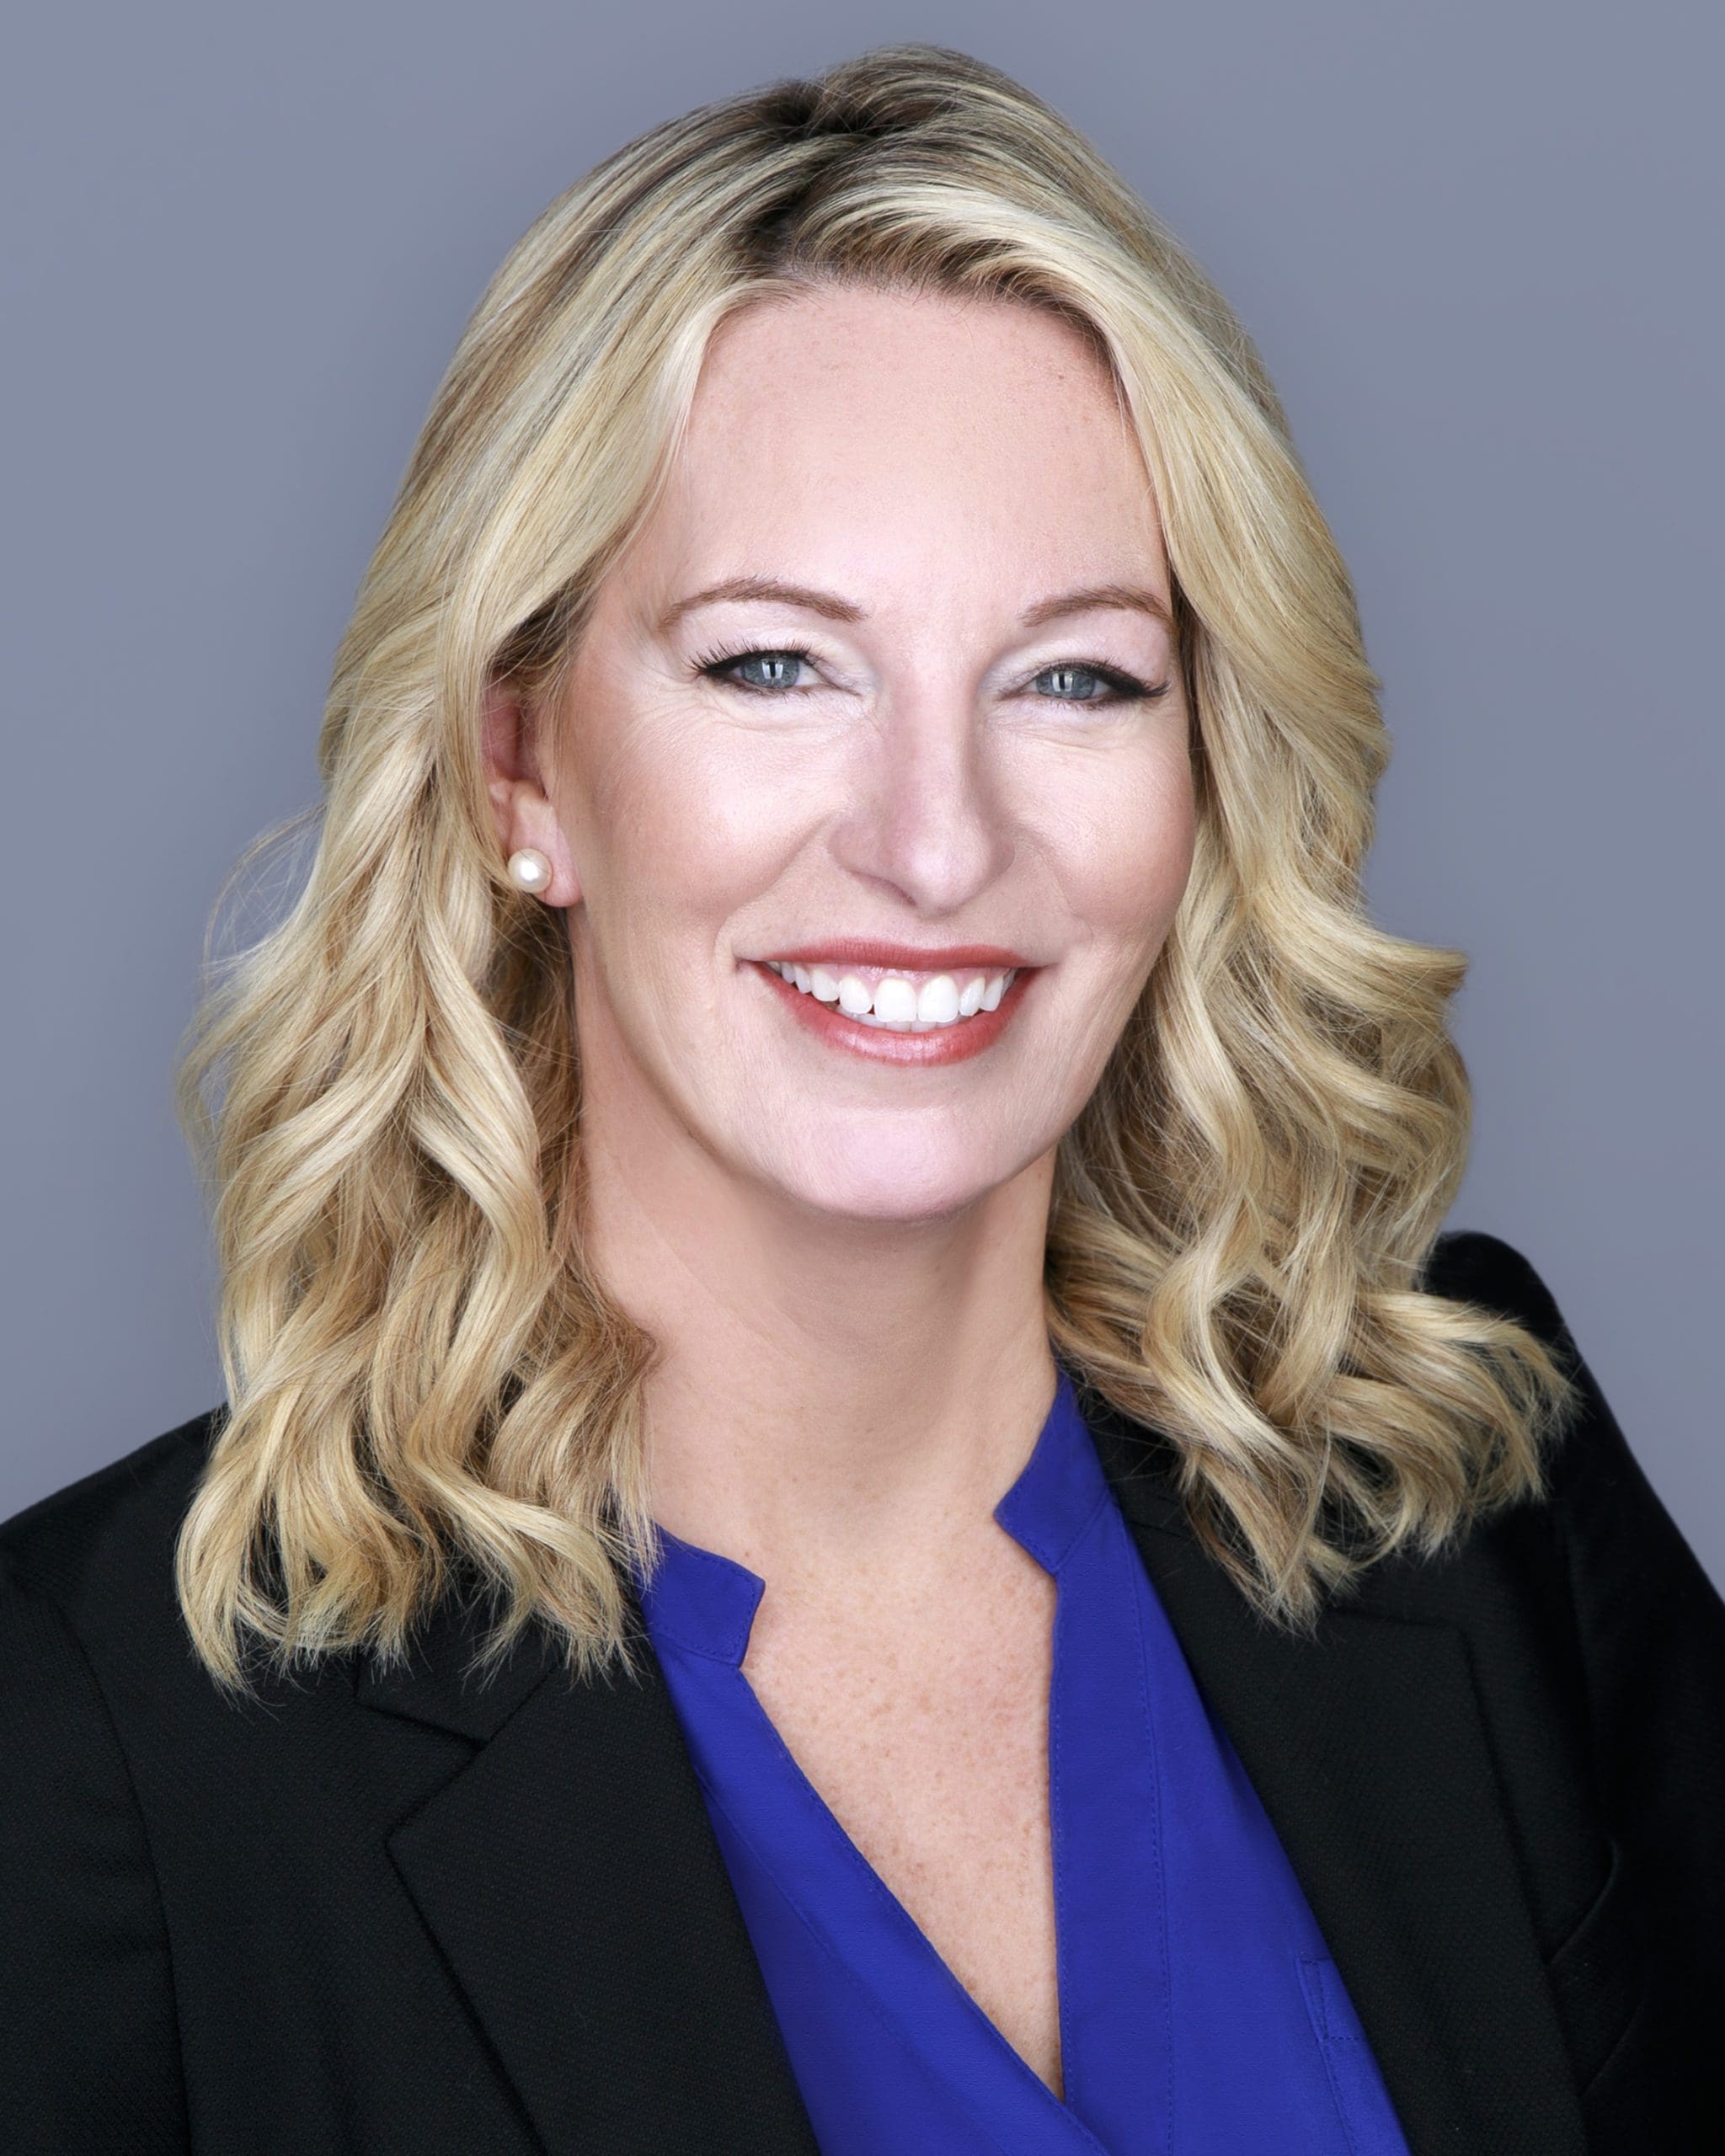 Headshot of Kelly Hyman, attorney at The Hyman Law Firm P.A., with a beaming smile. She has blonde, wavy hair and is wearing professional attire including a black blazer and a blue top, complemented by pearl earrings. The background is a neutral gray, highlighting her features and professional appearance."